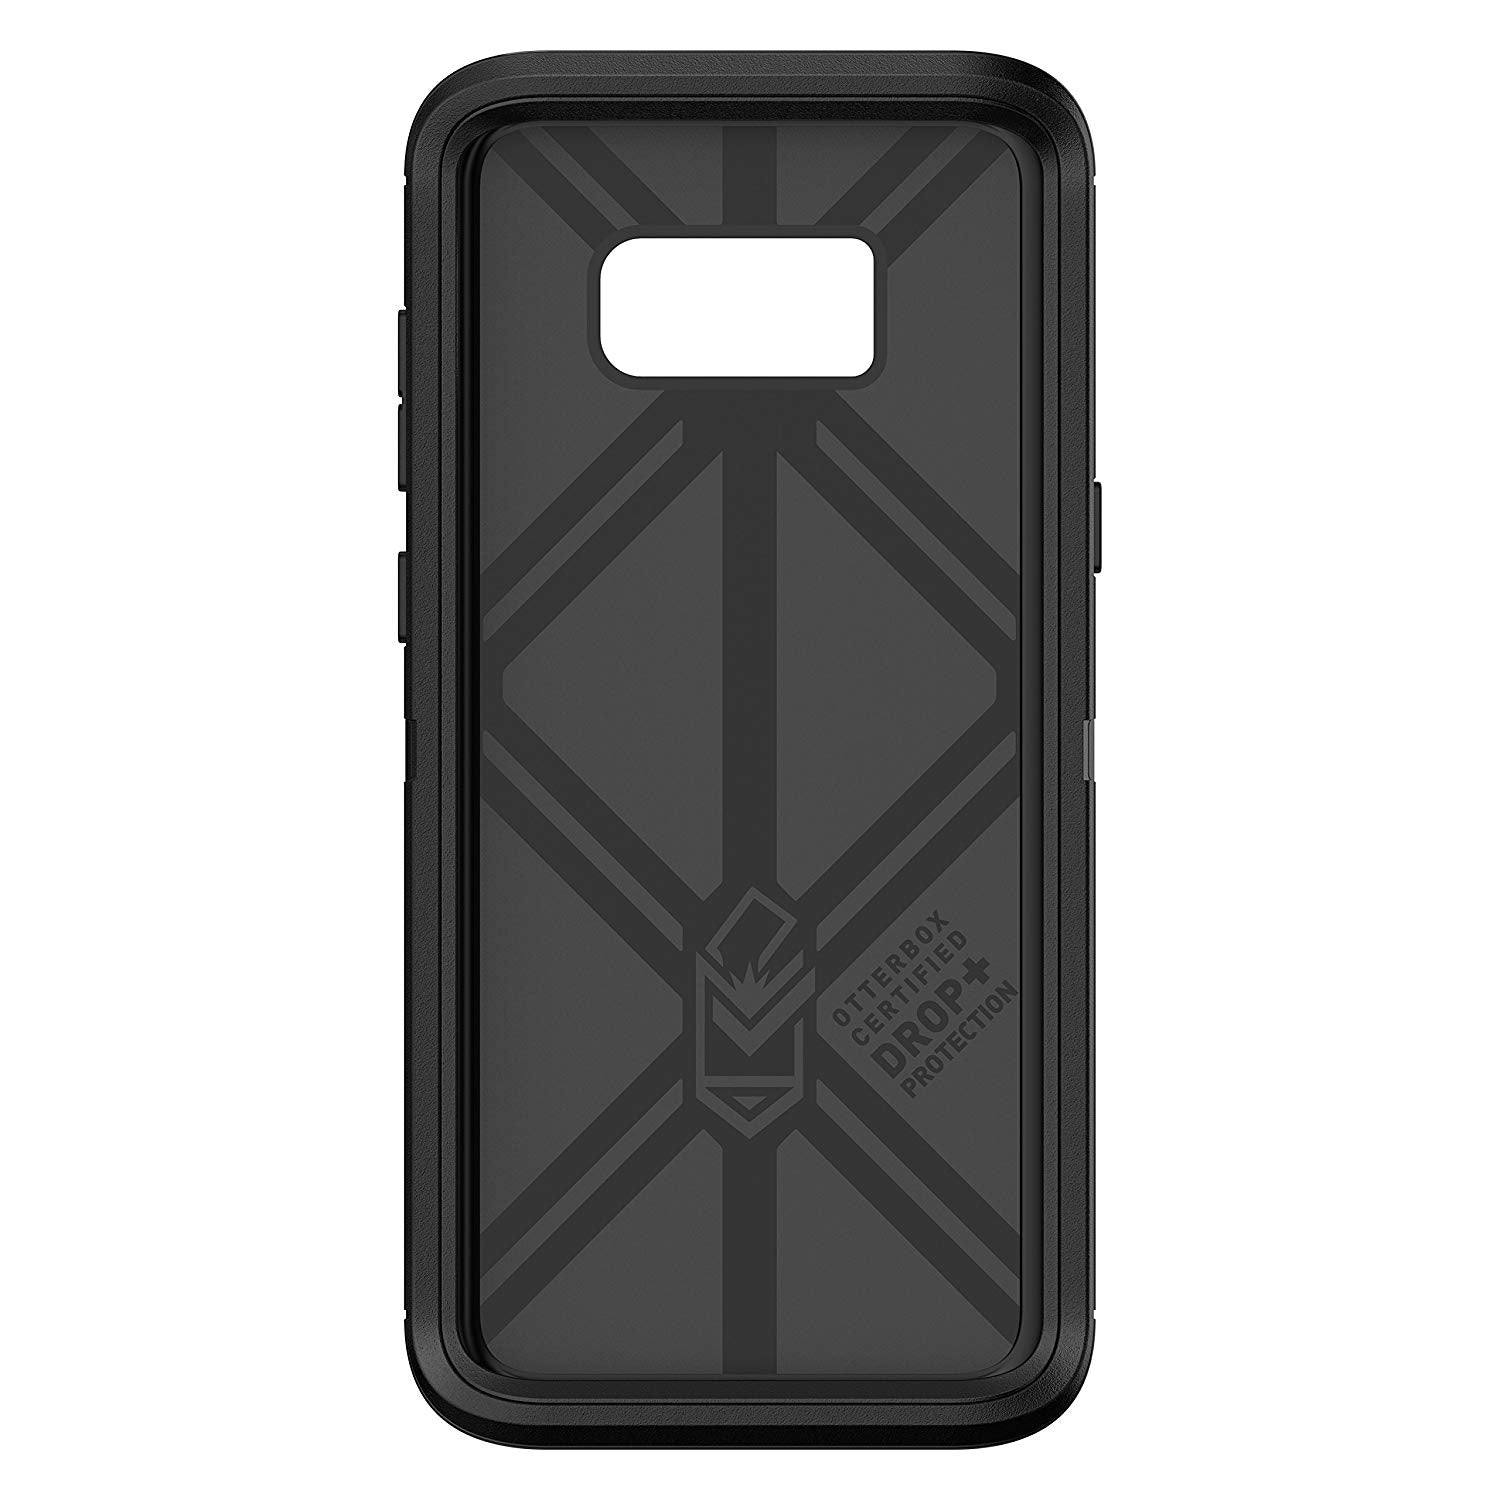 OtterBox DEFENDER SERIES Case &amp; Holster for Samsung Galaxy S8+ - Black (Certified Refurbished)